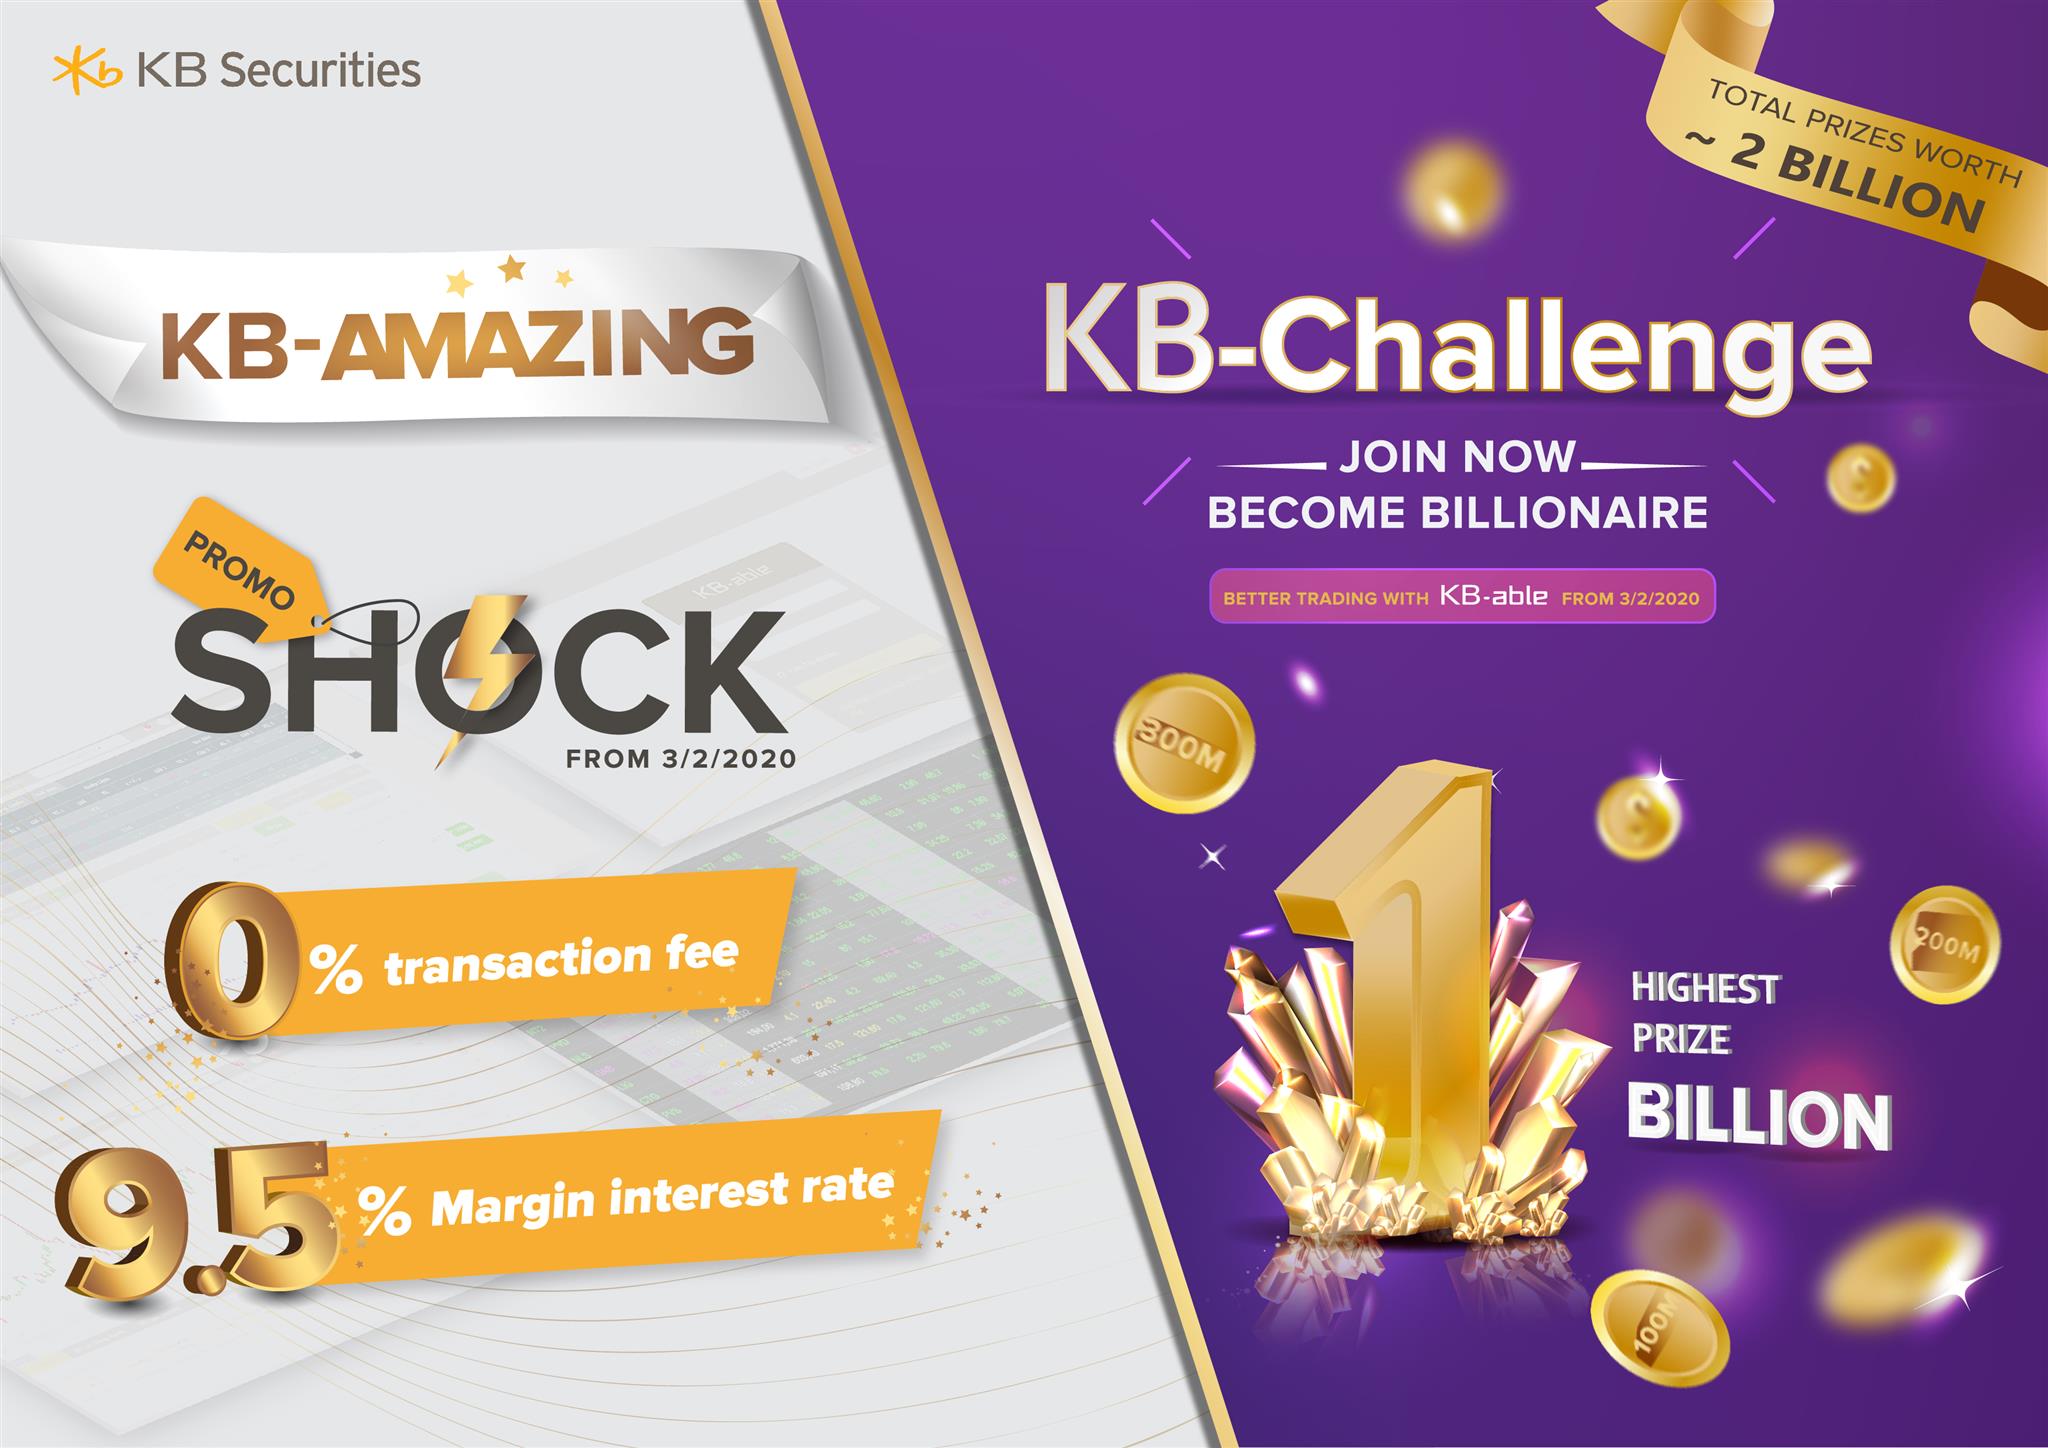 KBSV launched KB-Amazing promotion and KB-Challenge contest